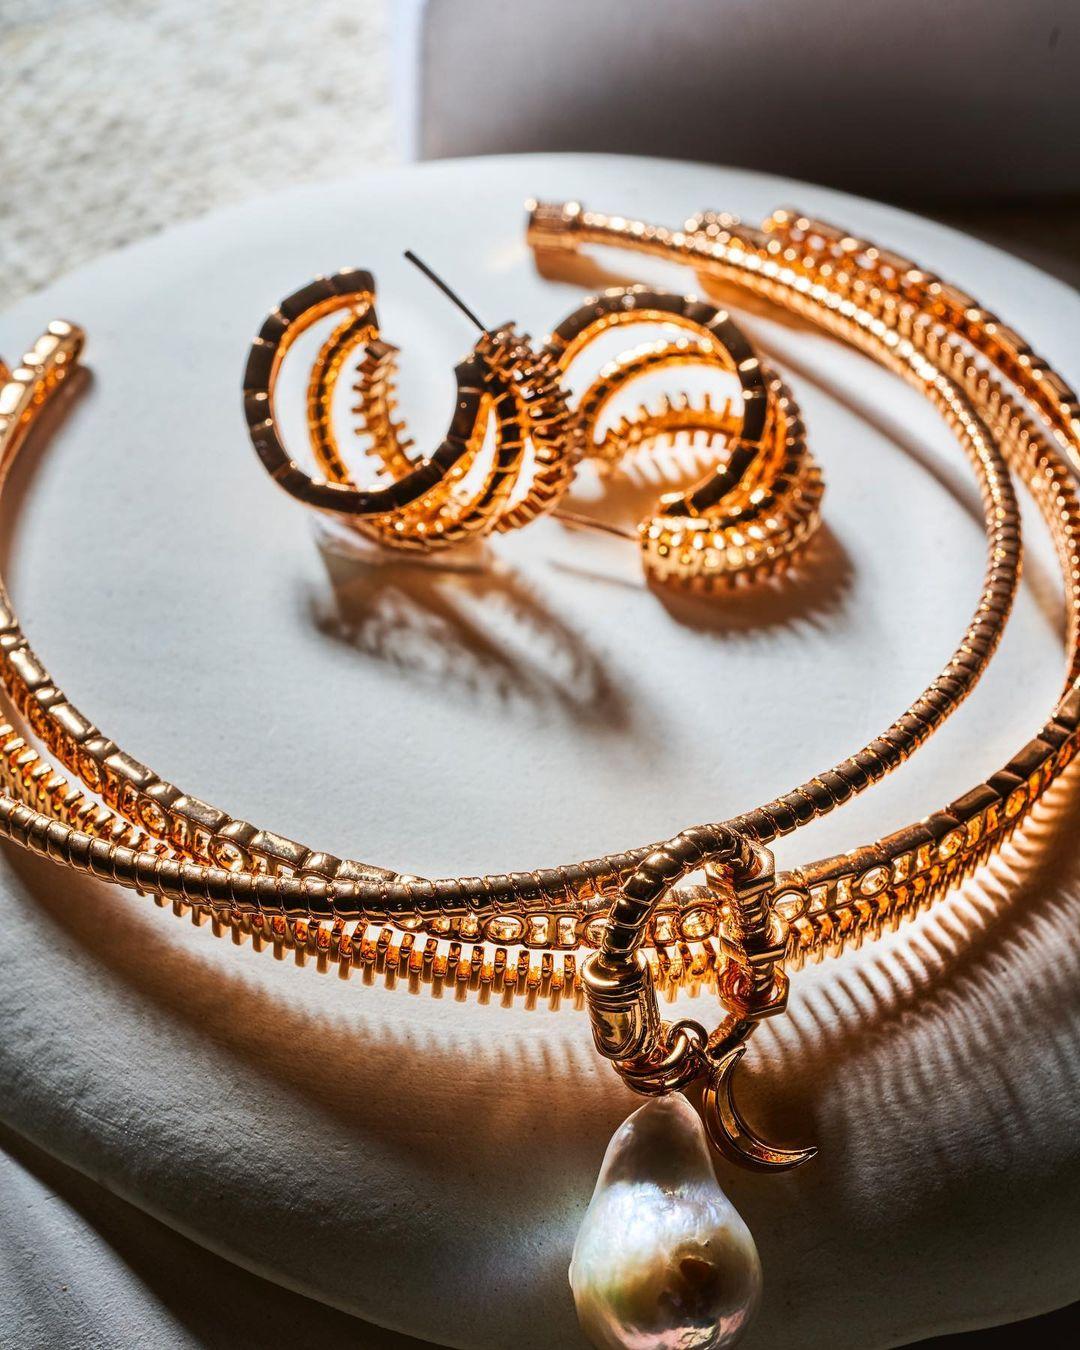 Traditional Indian Wedding Gifts Common Across Different Cultures You Need  to See & Bookmark